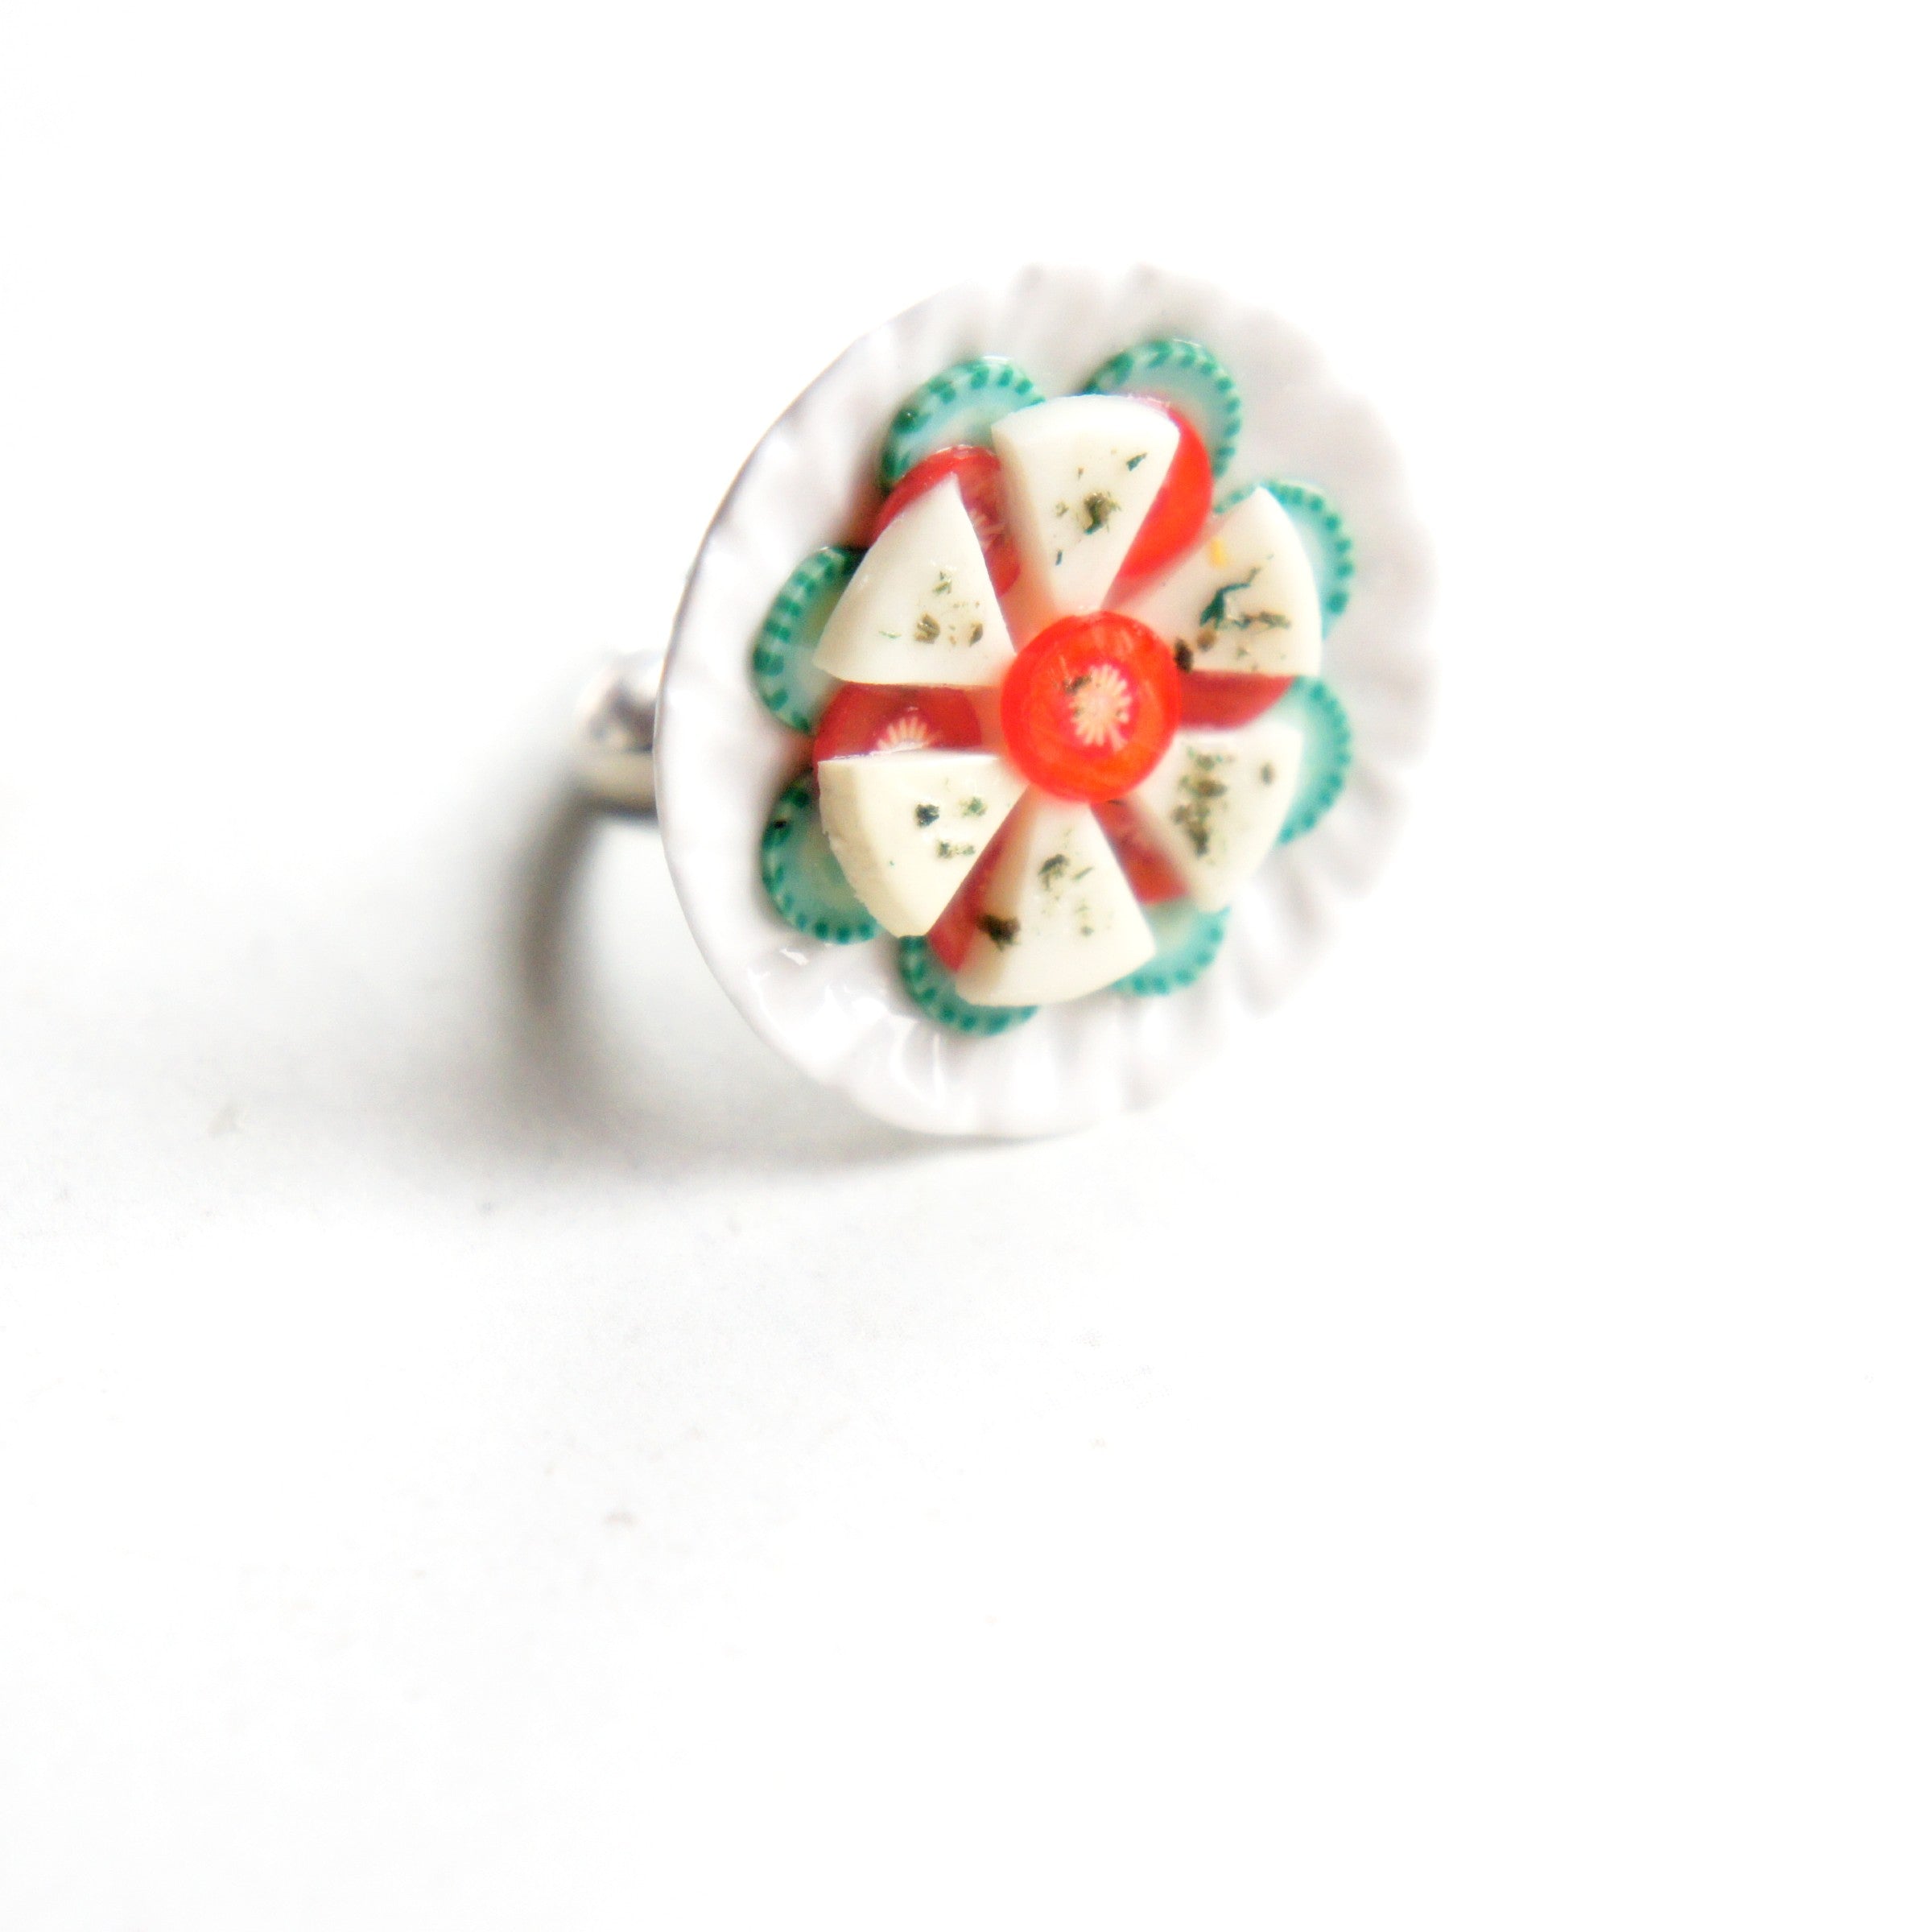 Caprese Salad Ring - Jillicious charms and accessories